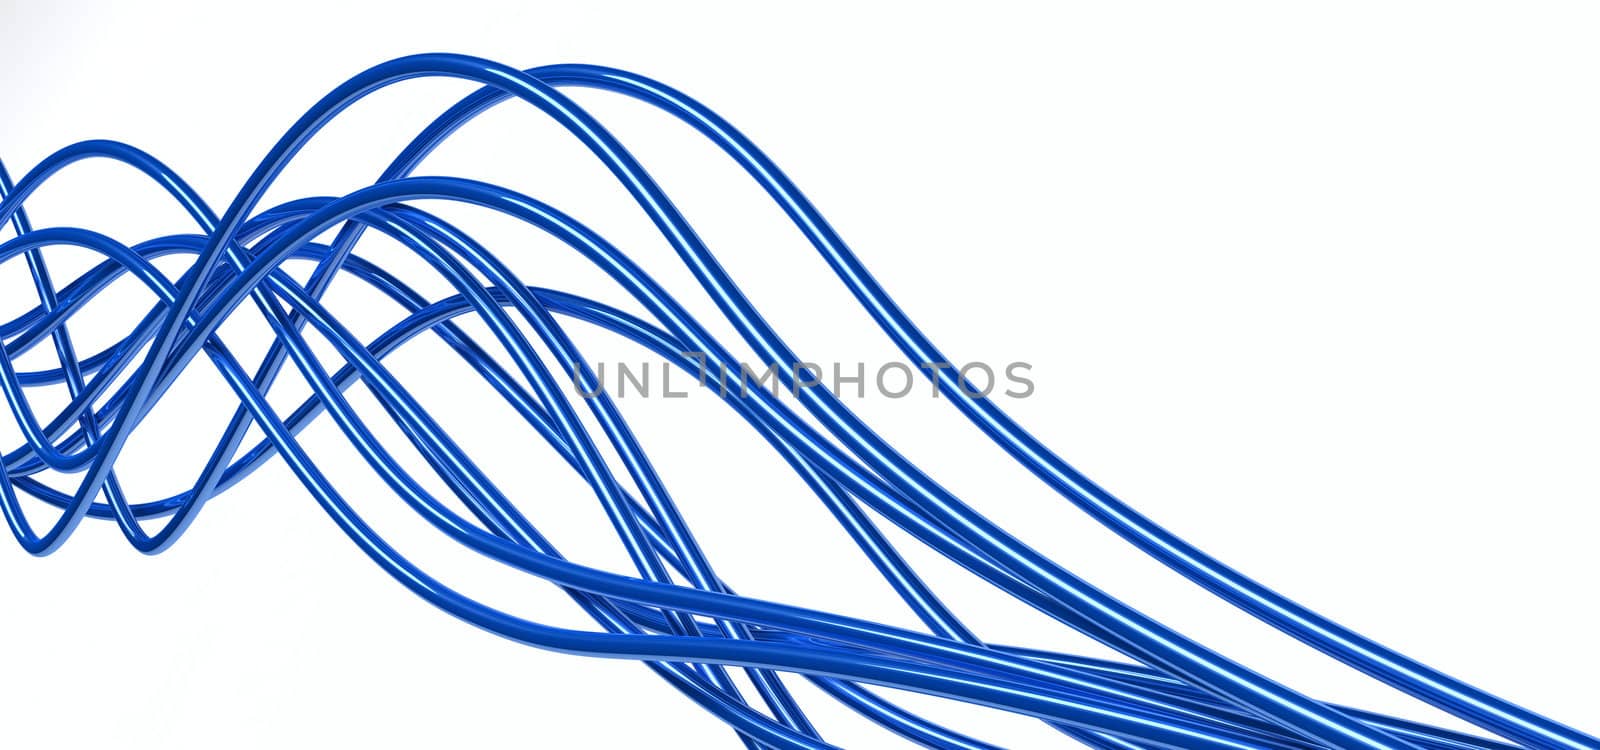 bright metallic fibre-optical blue cables on a white background by Serp